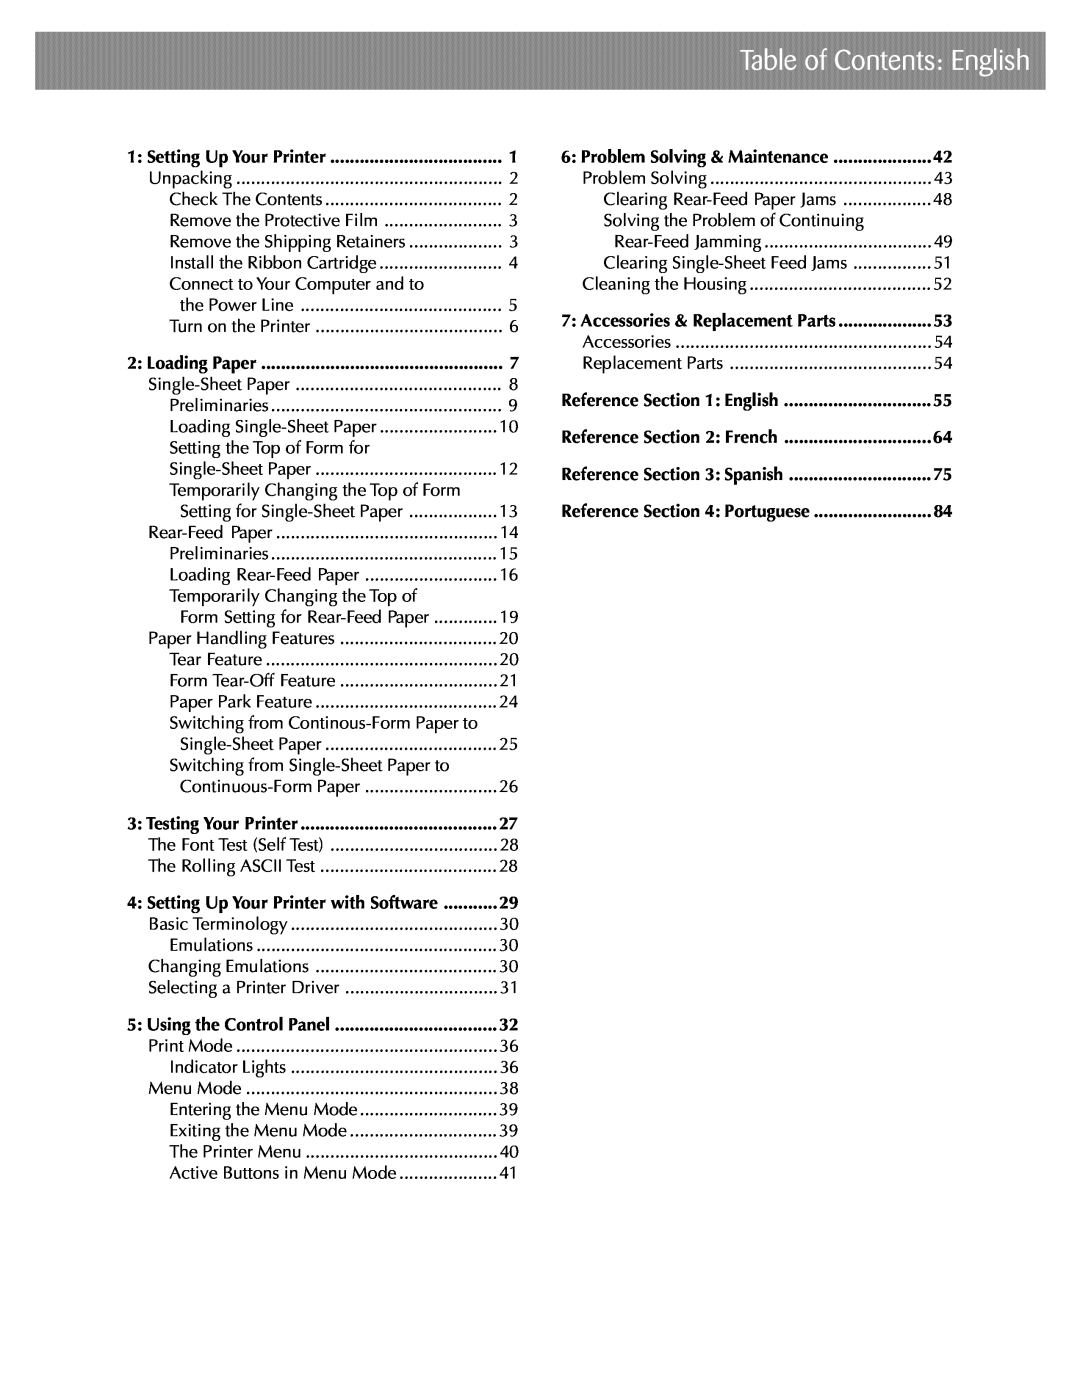 Oki ML590 manual Table of Contents English 